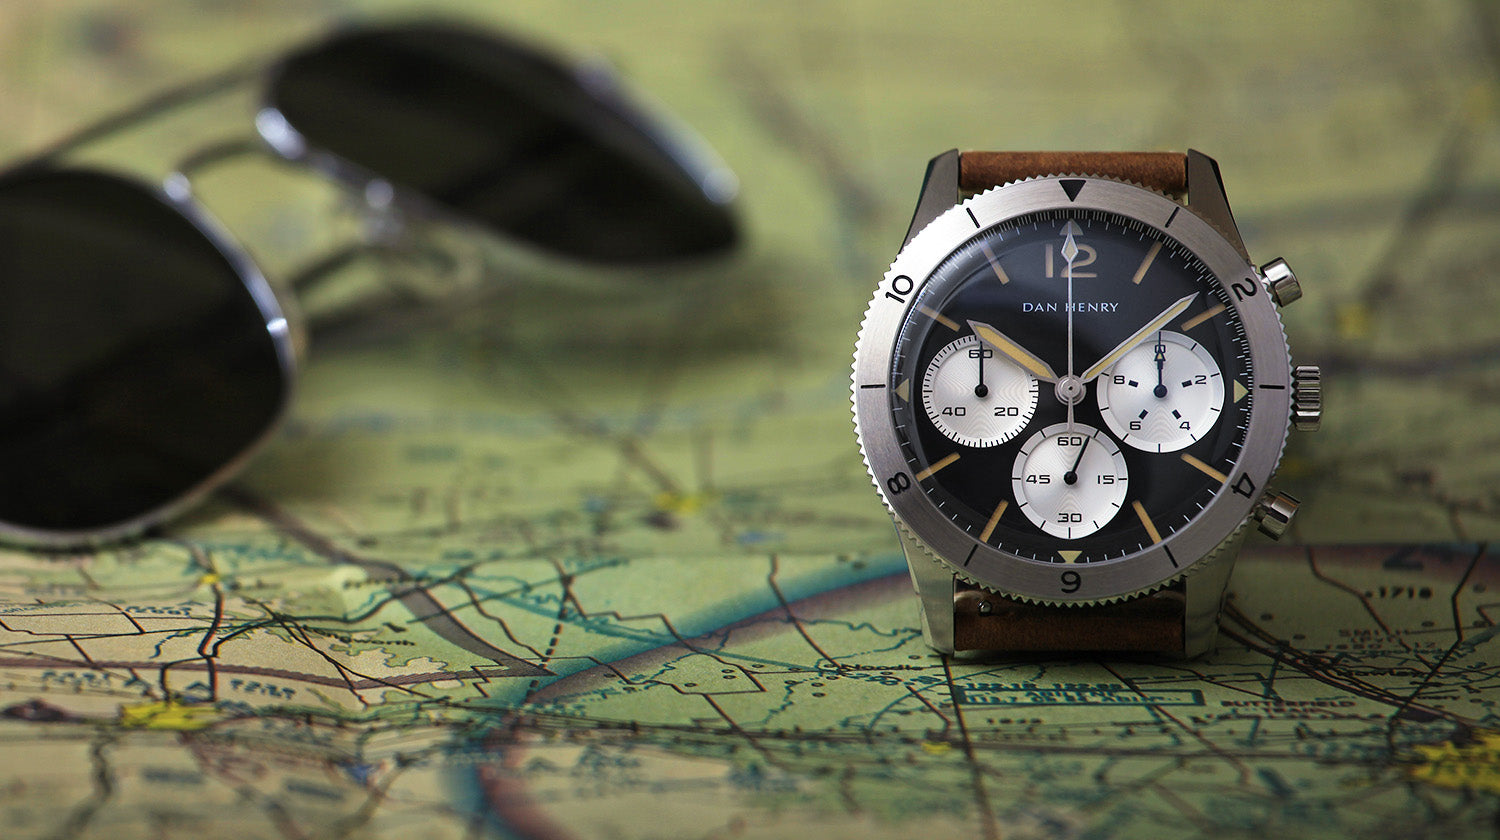 A classic chronograph good looks (plus a fantastic caseback) for an extremely palatable price.